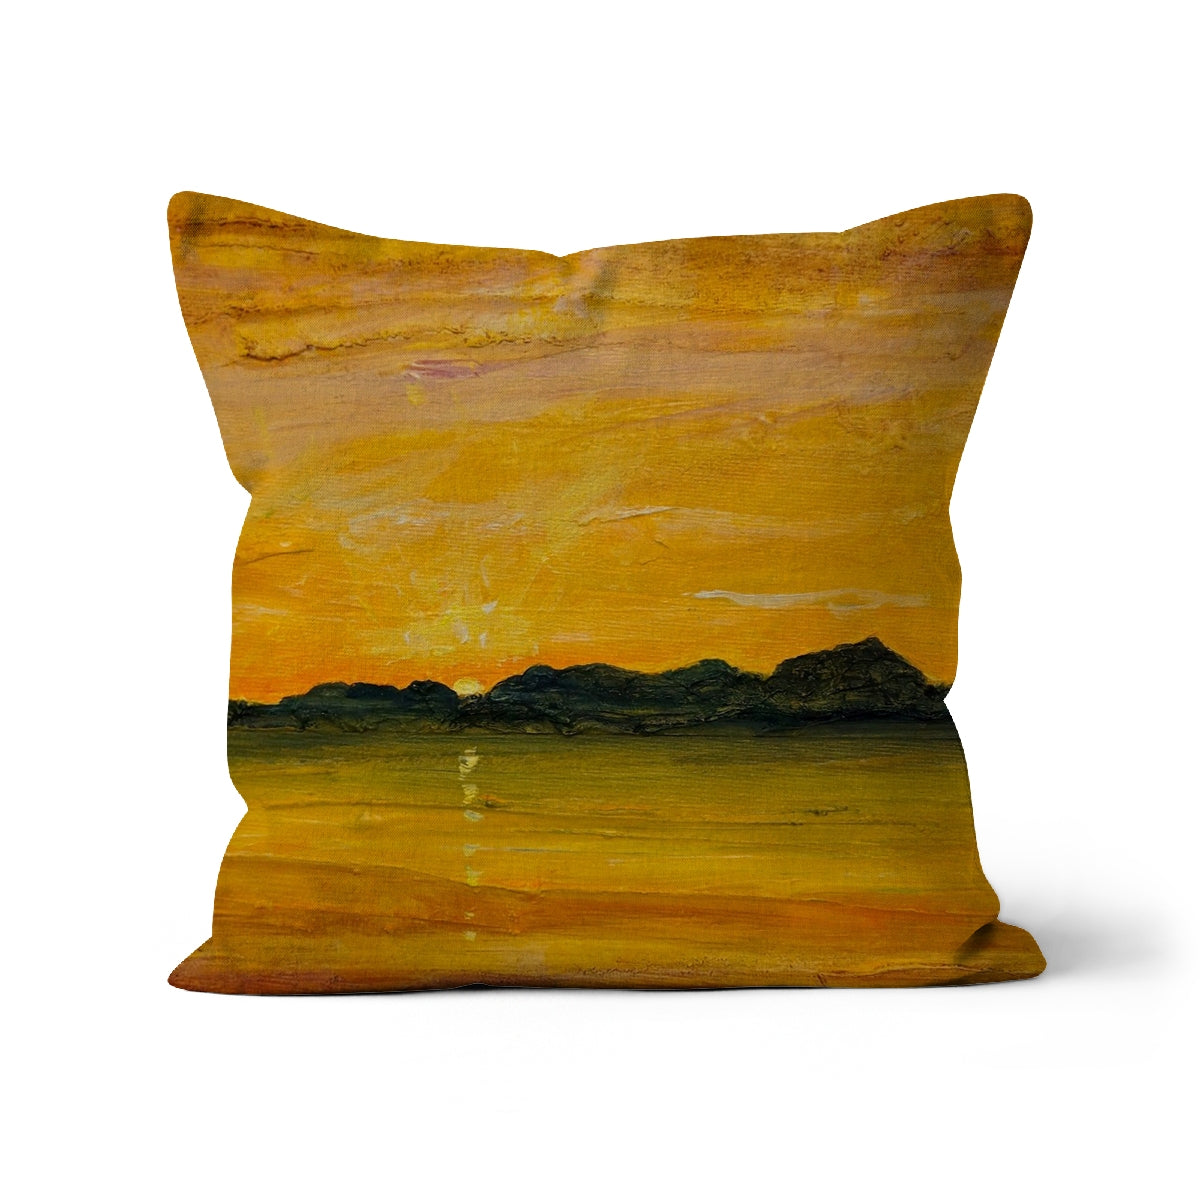 Jura Sunset Art Gifts Cushion-Cushions-Hebridean Islands Art Gallery-Canvas-22"x22"-Paintings, Prints, Homeware, Art Gifts From Scotland By Scottish Artist Kevin Hunter